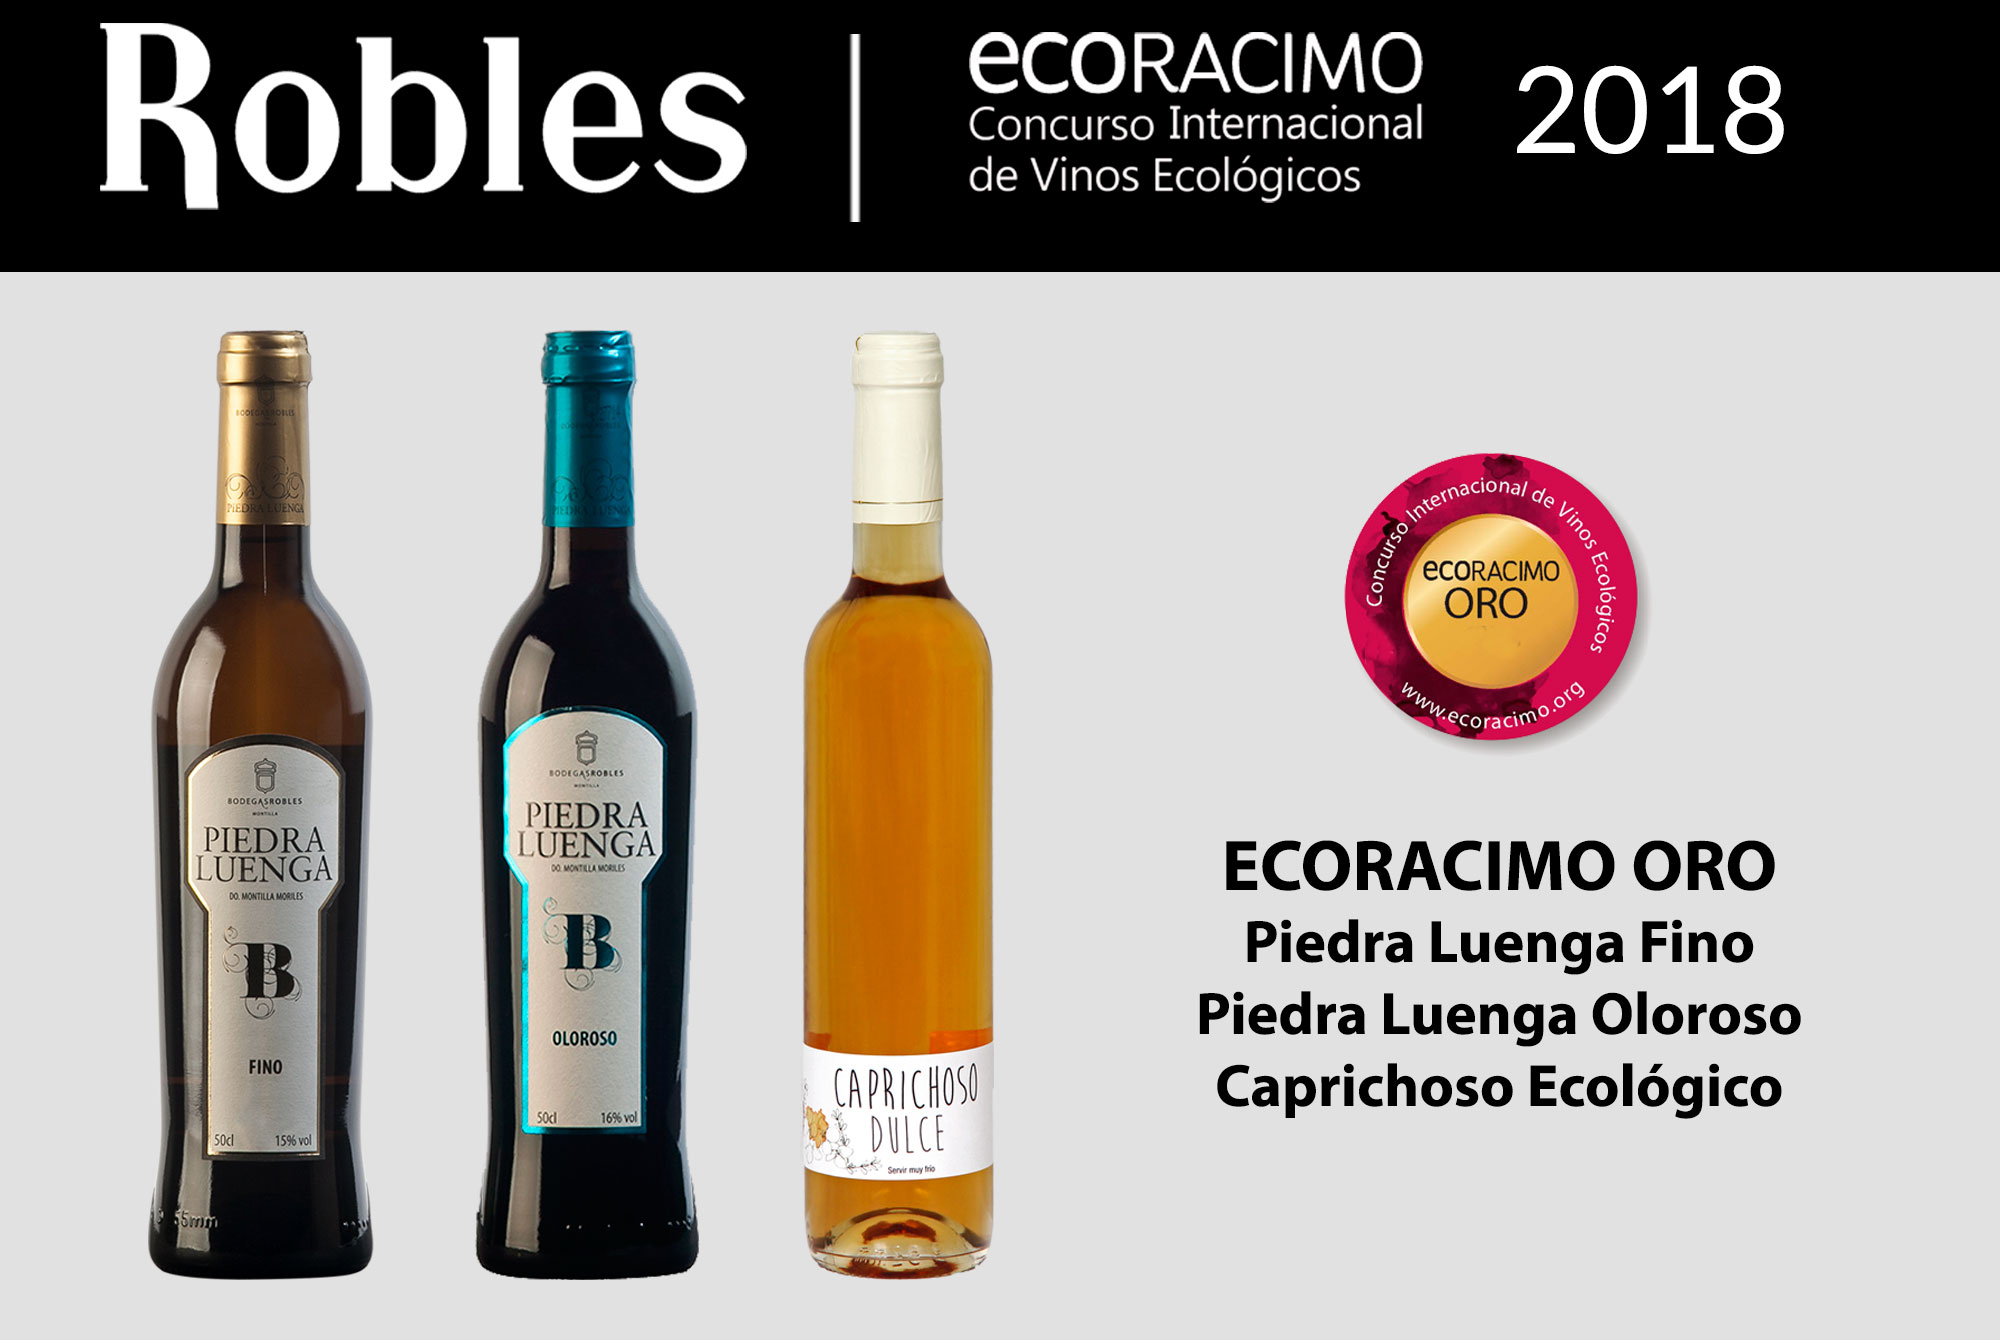 Bodegas Robles wins three Gold Medals at Ecoracimo 2018